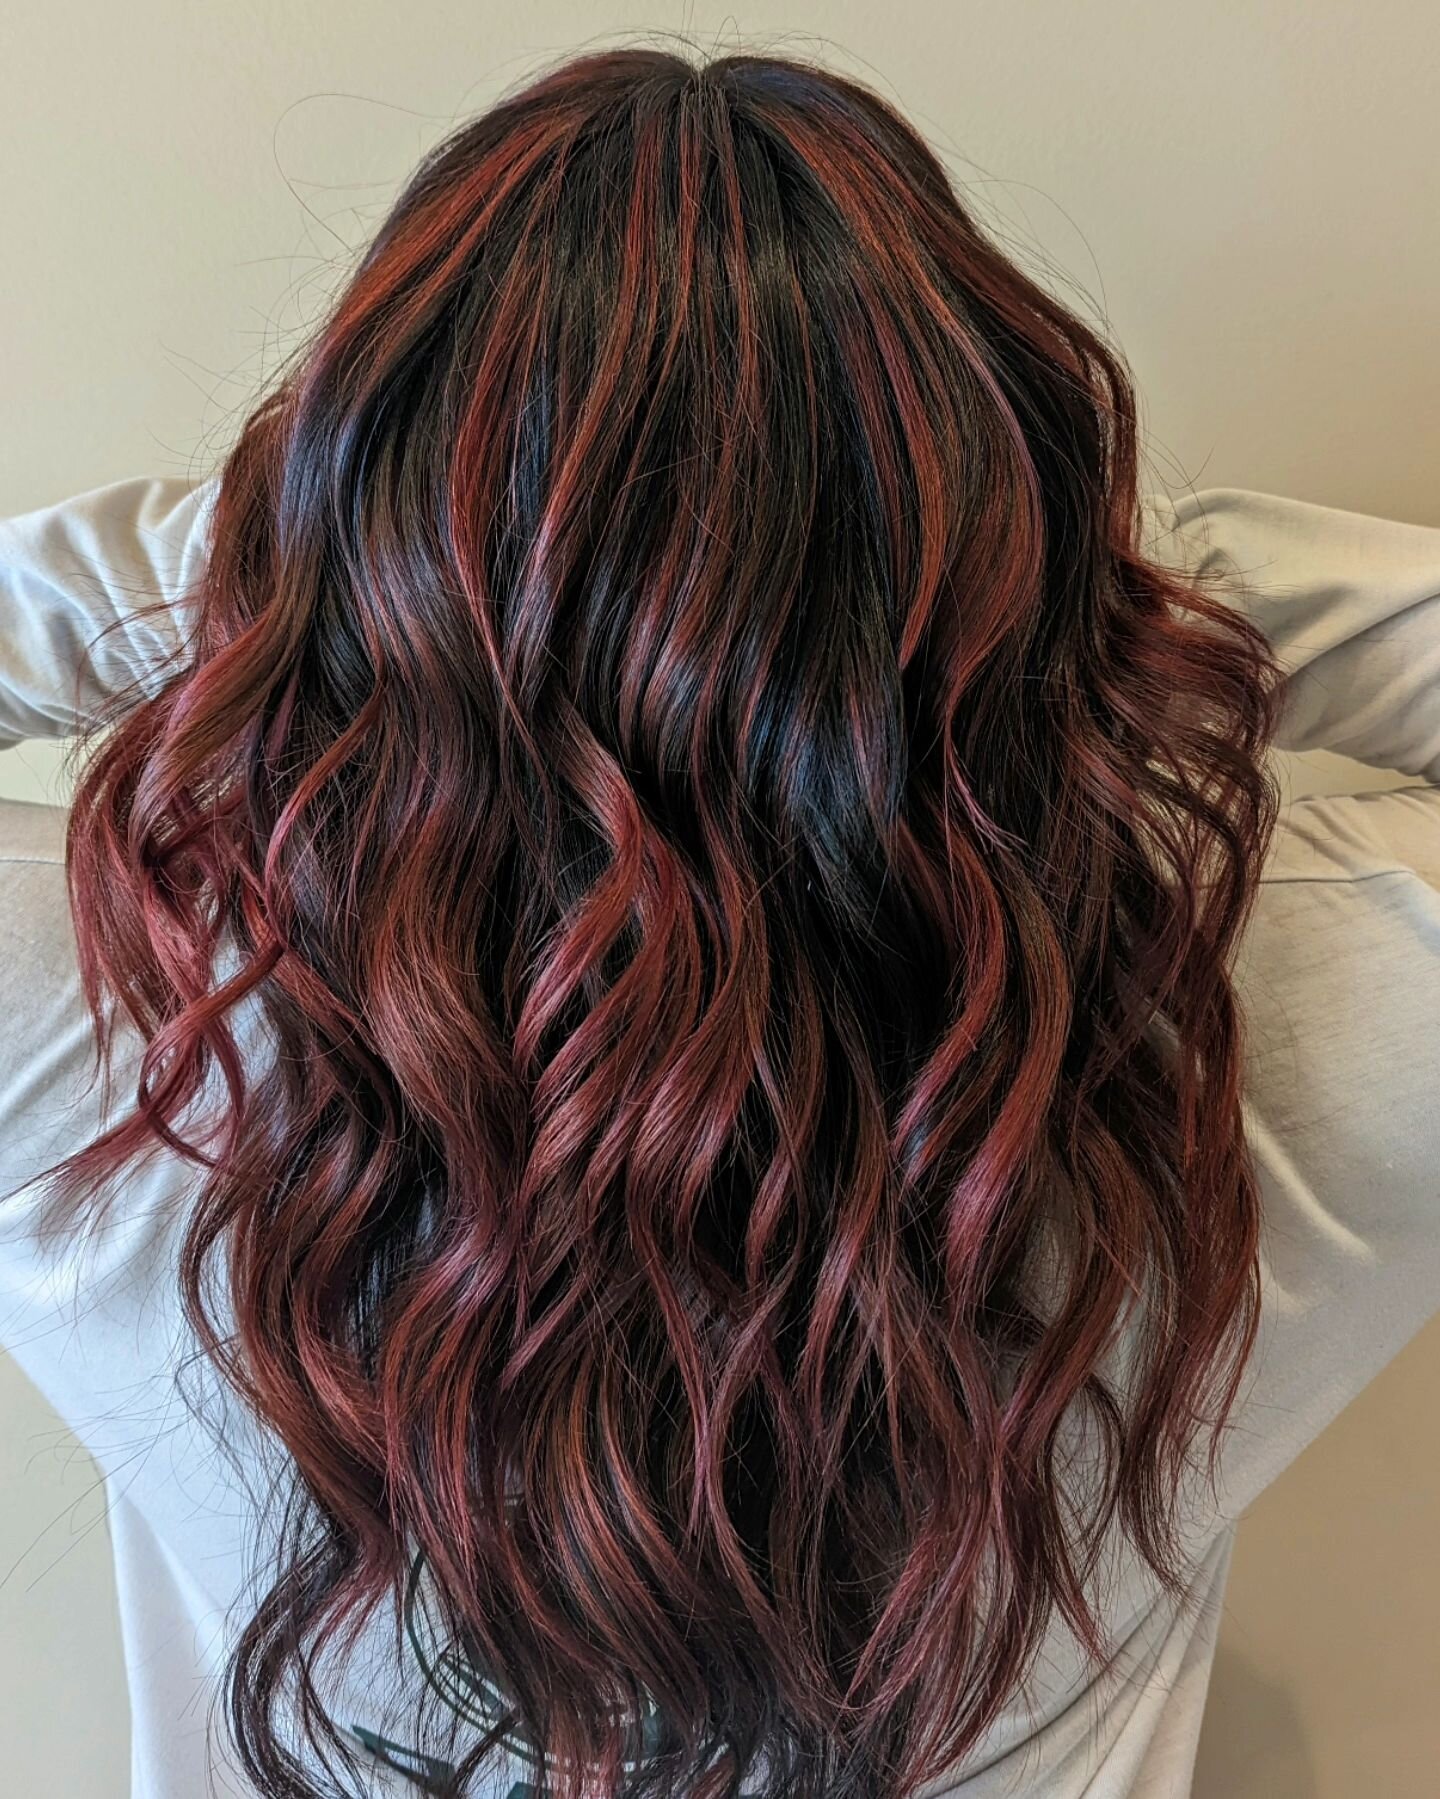 Beautiful Dark Red Ribbons just in time for the Fall Season!!! 
🍁🍂🌻
What I love the most about this shade is  the option to let it naturally fade into Copper or Warm Blonde tones before refreshing the color! &hearts;️🧡💛
A special thank you to th